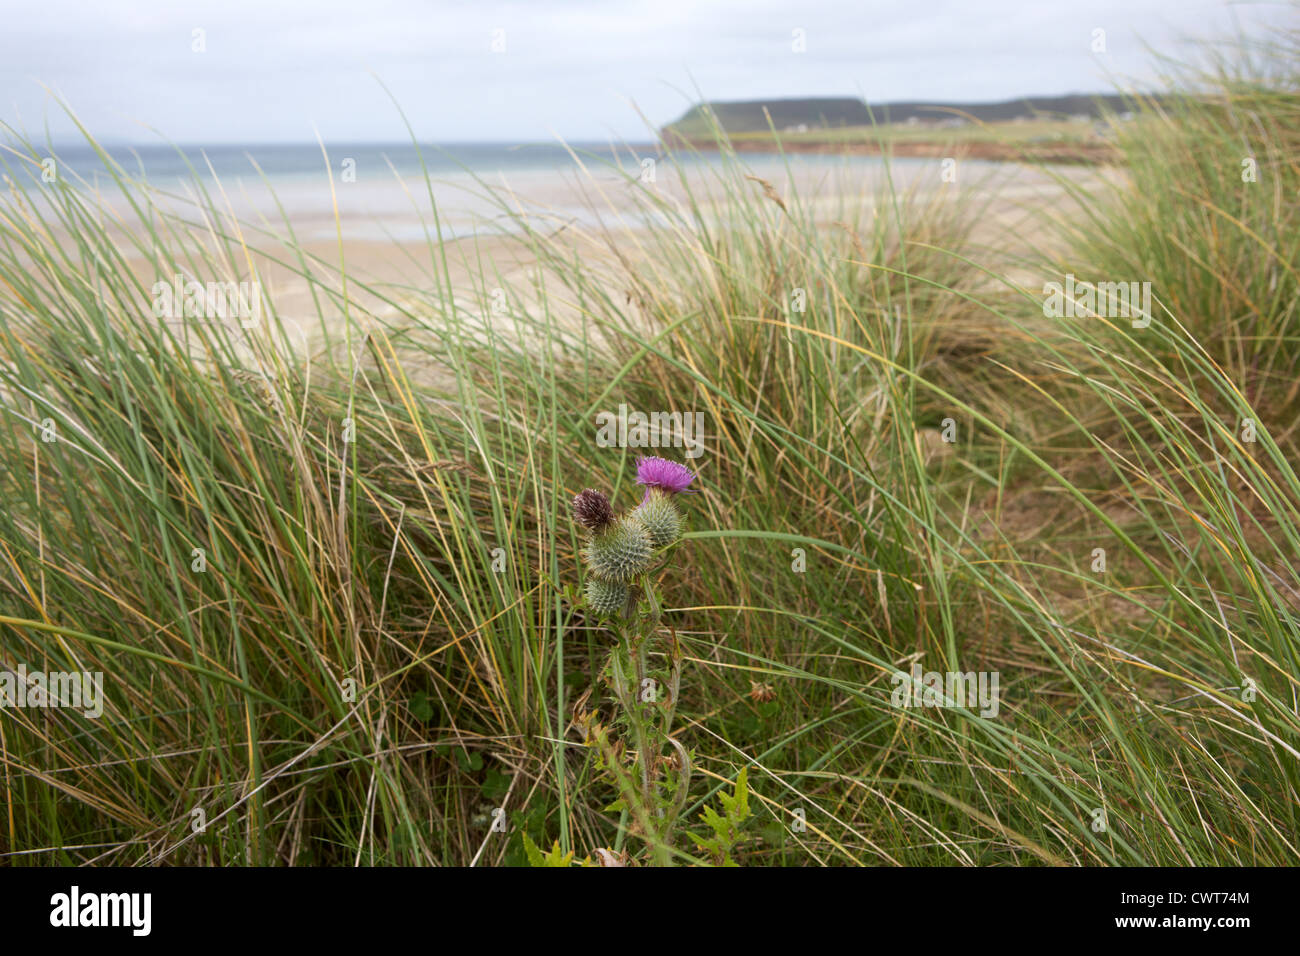 scots spear thistle growing wild at sandy beach at dunnet bay scotland uk Stock Photo